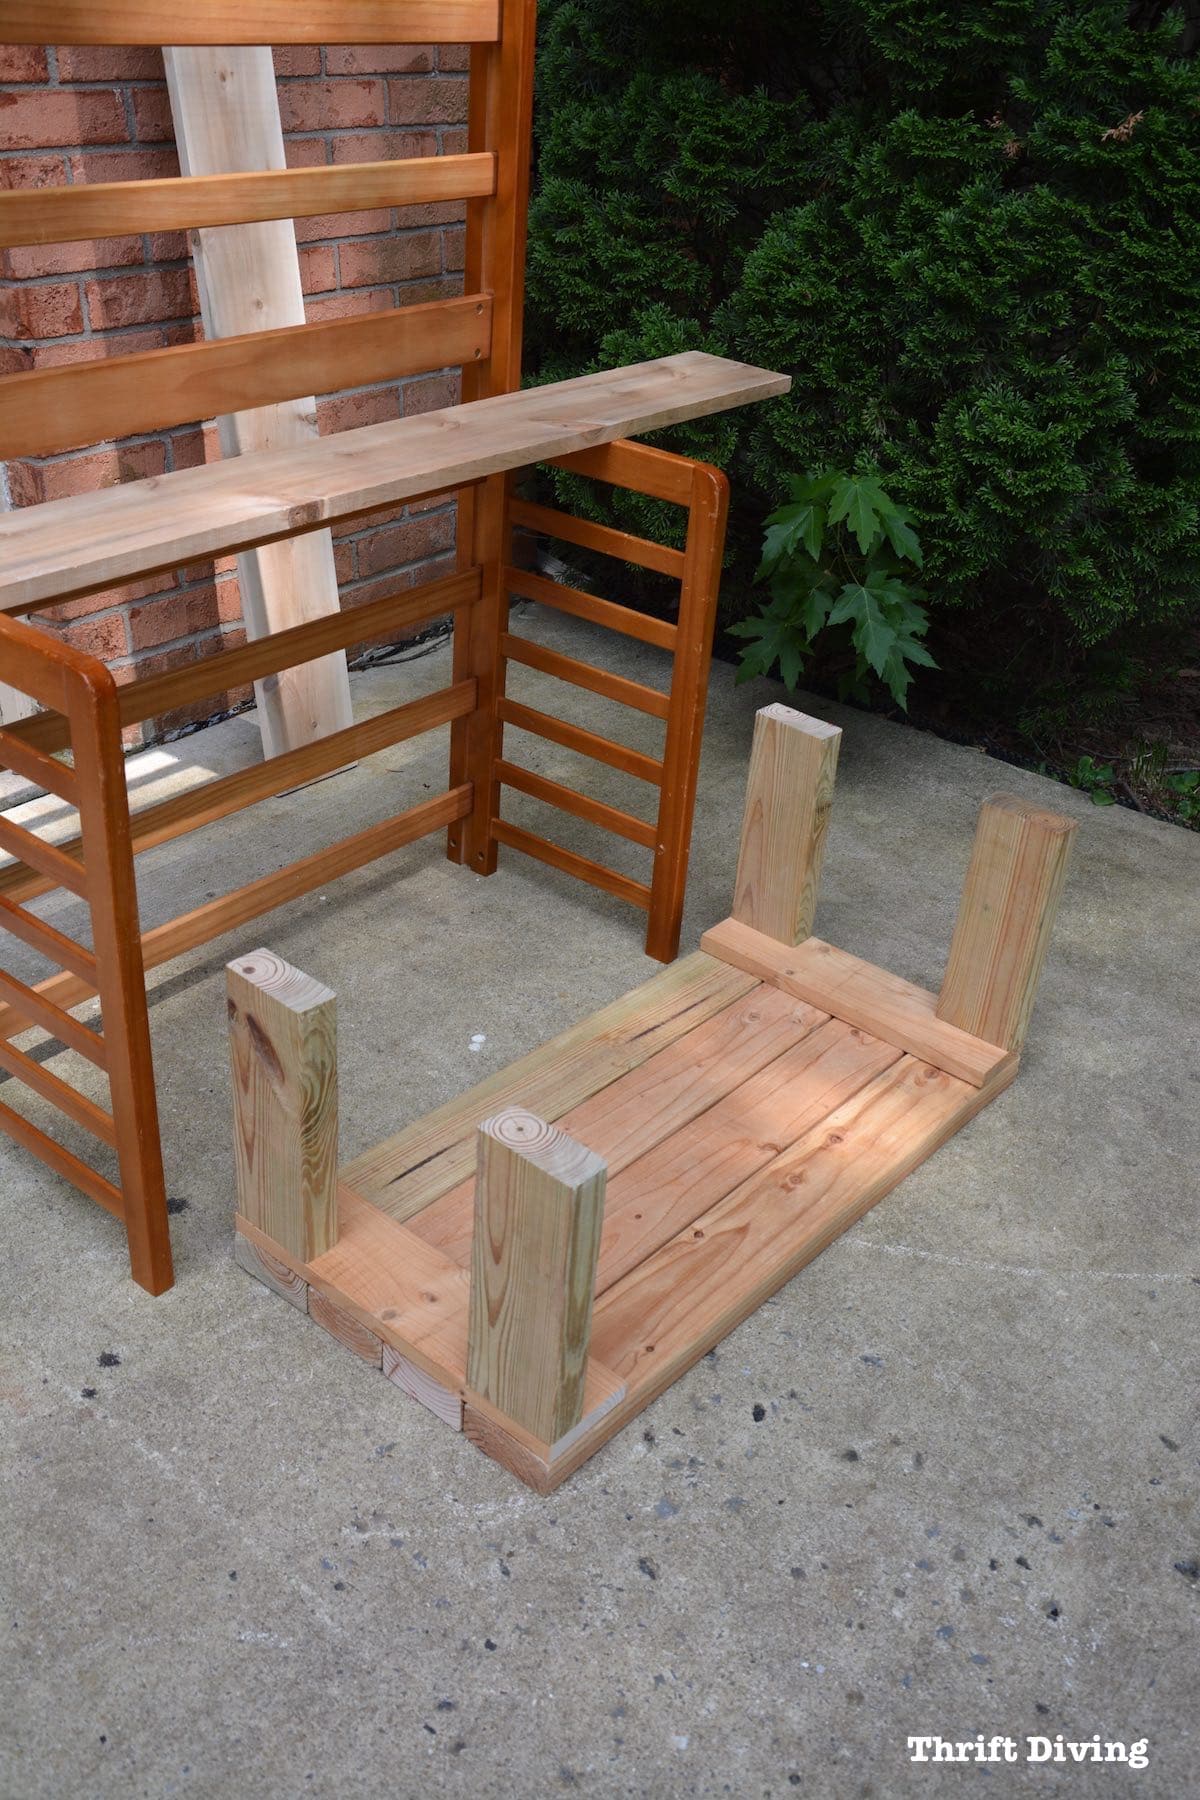 Repurposed toddler bed: What to do with an old toddler bed - A toddler bed can be repurposed into a potting bench - Build the base. - Thrift Diving